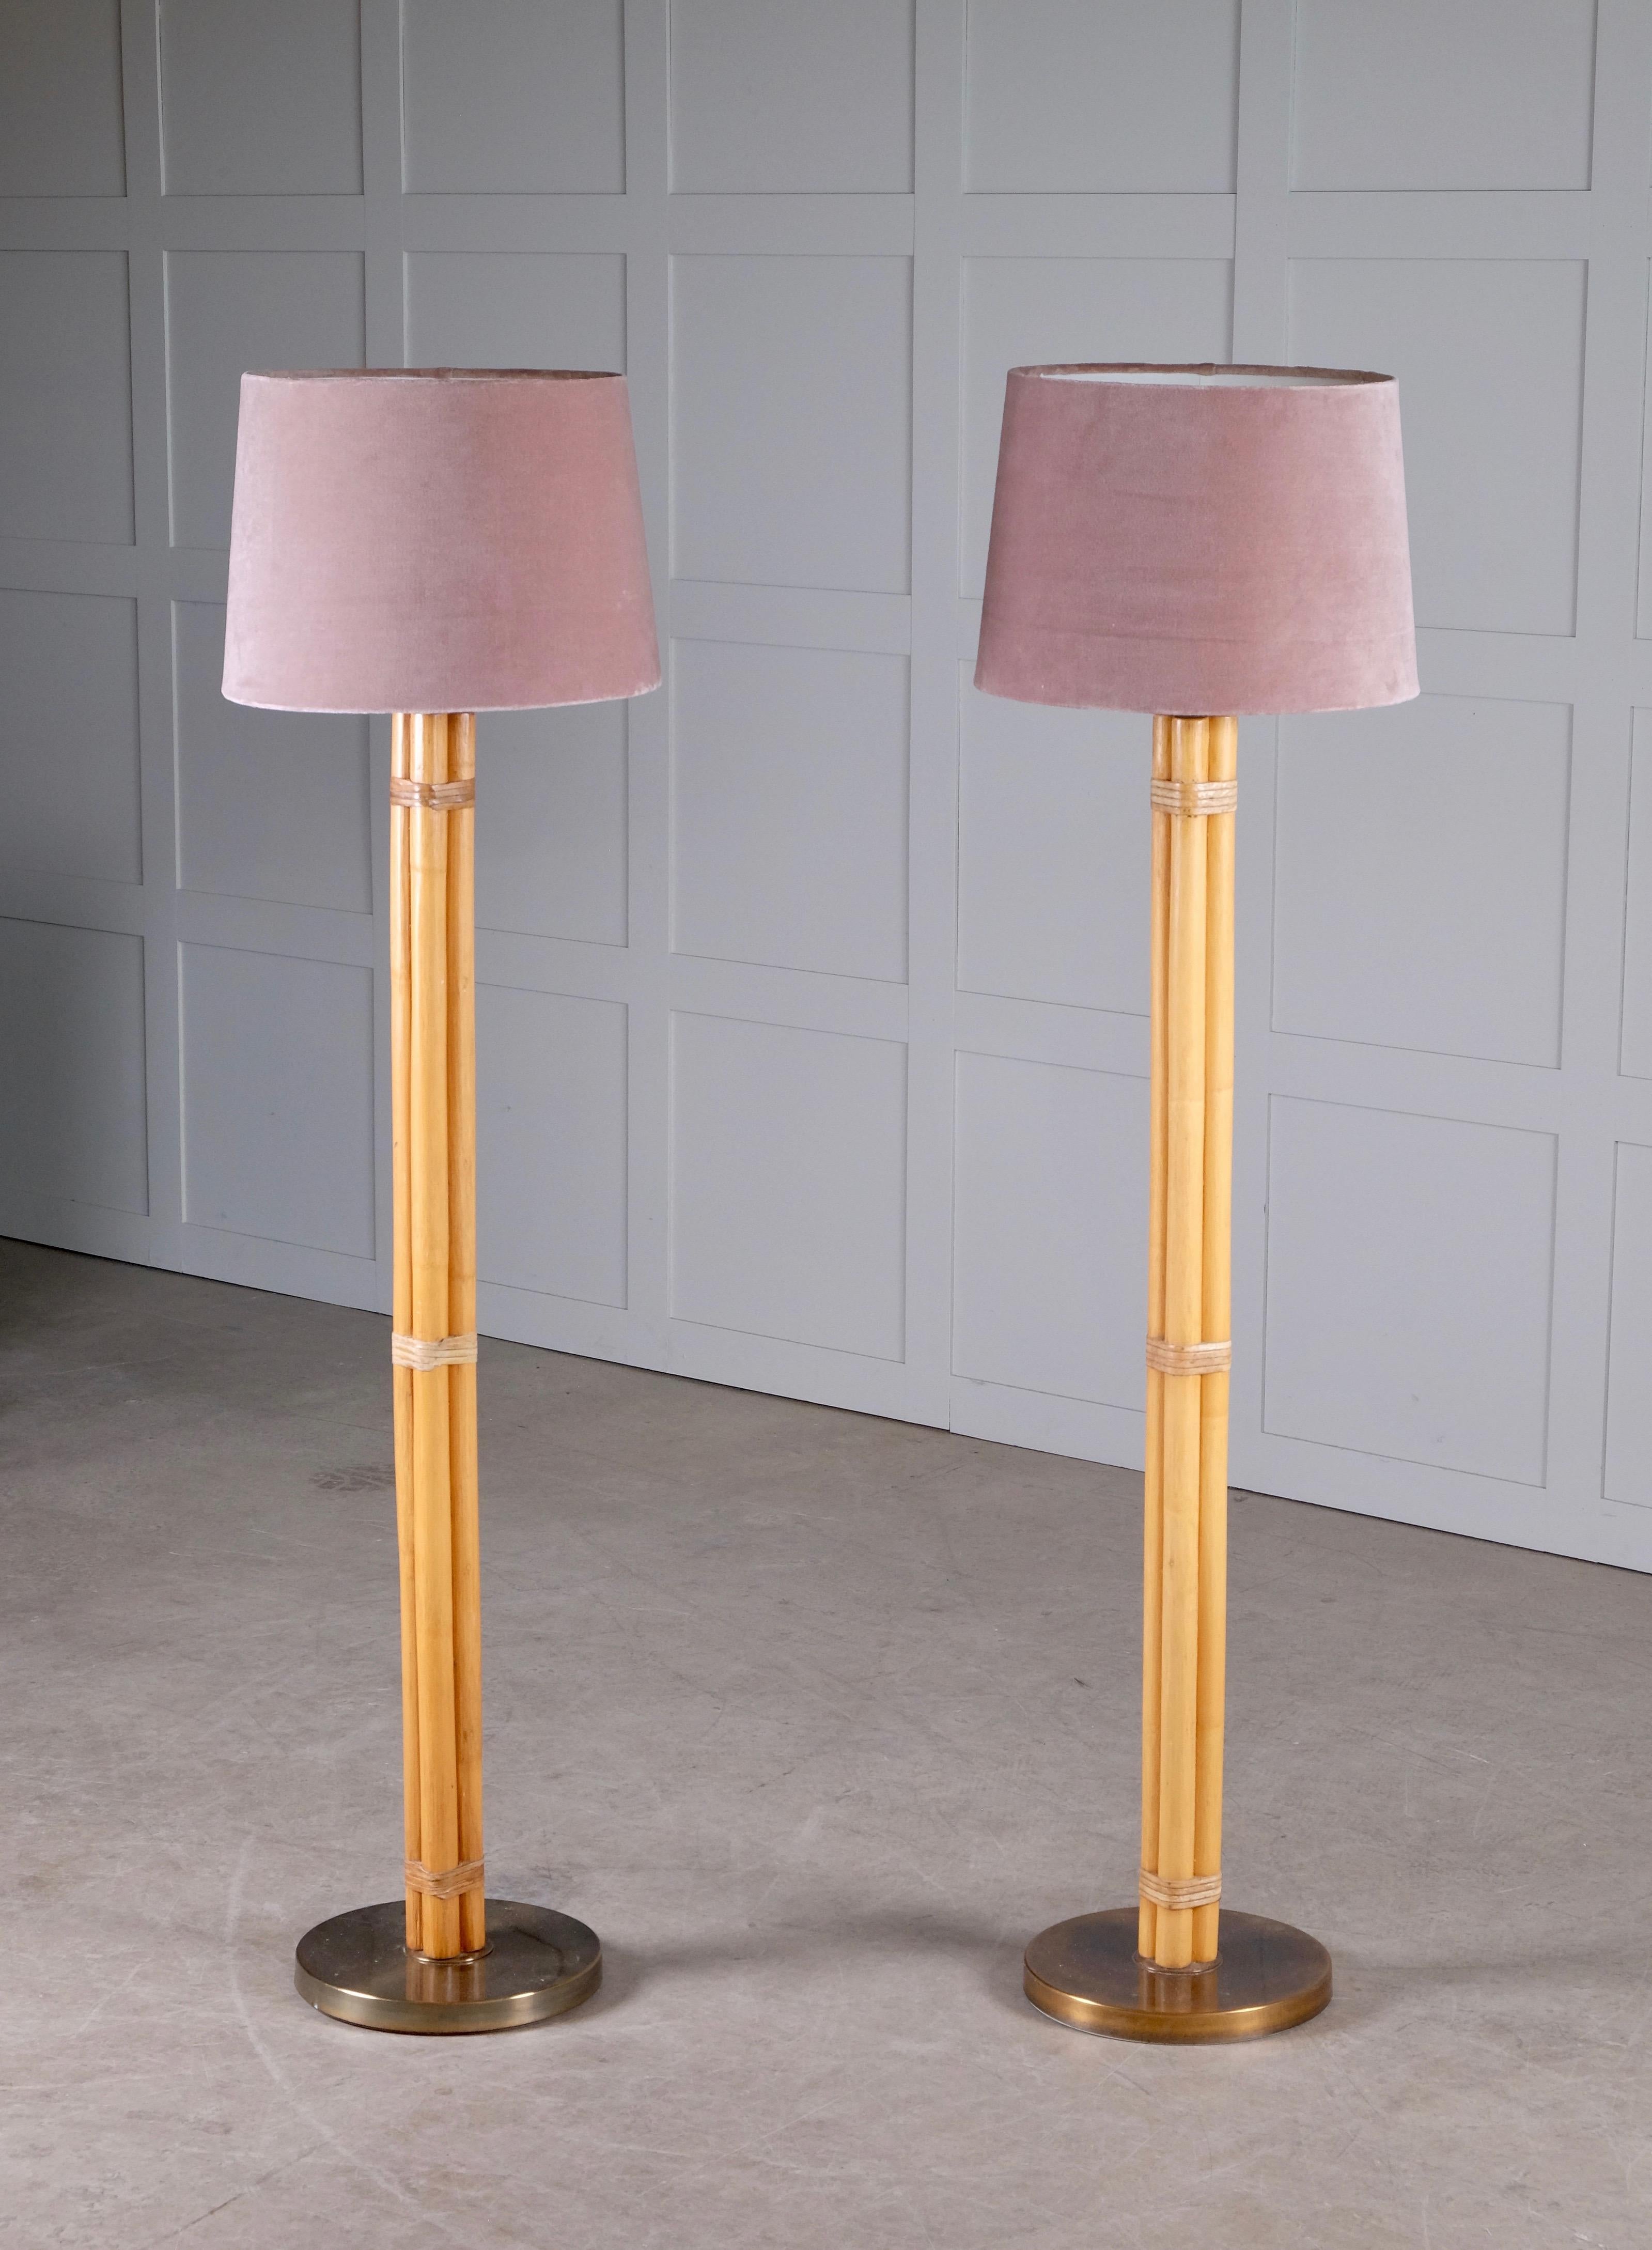 Mid-20th Century Pair of Swedish Brass and Bamboo Floor Lamps by Bergboms, 1970s For Sale